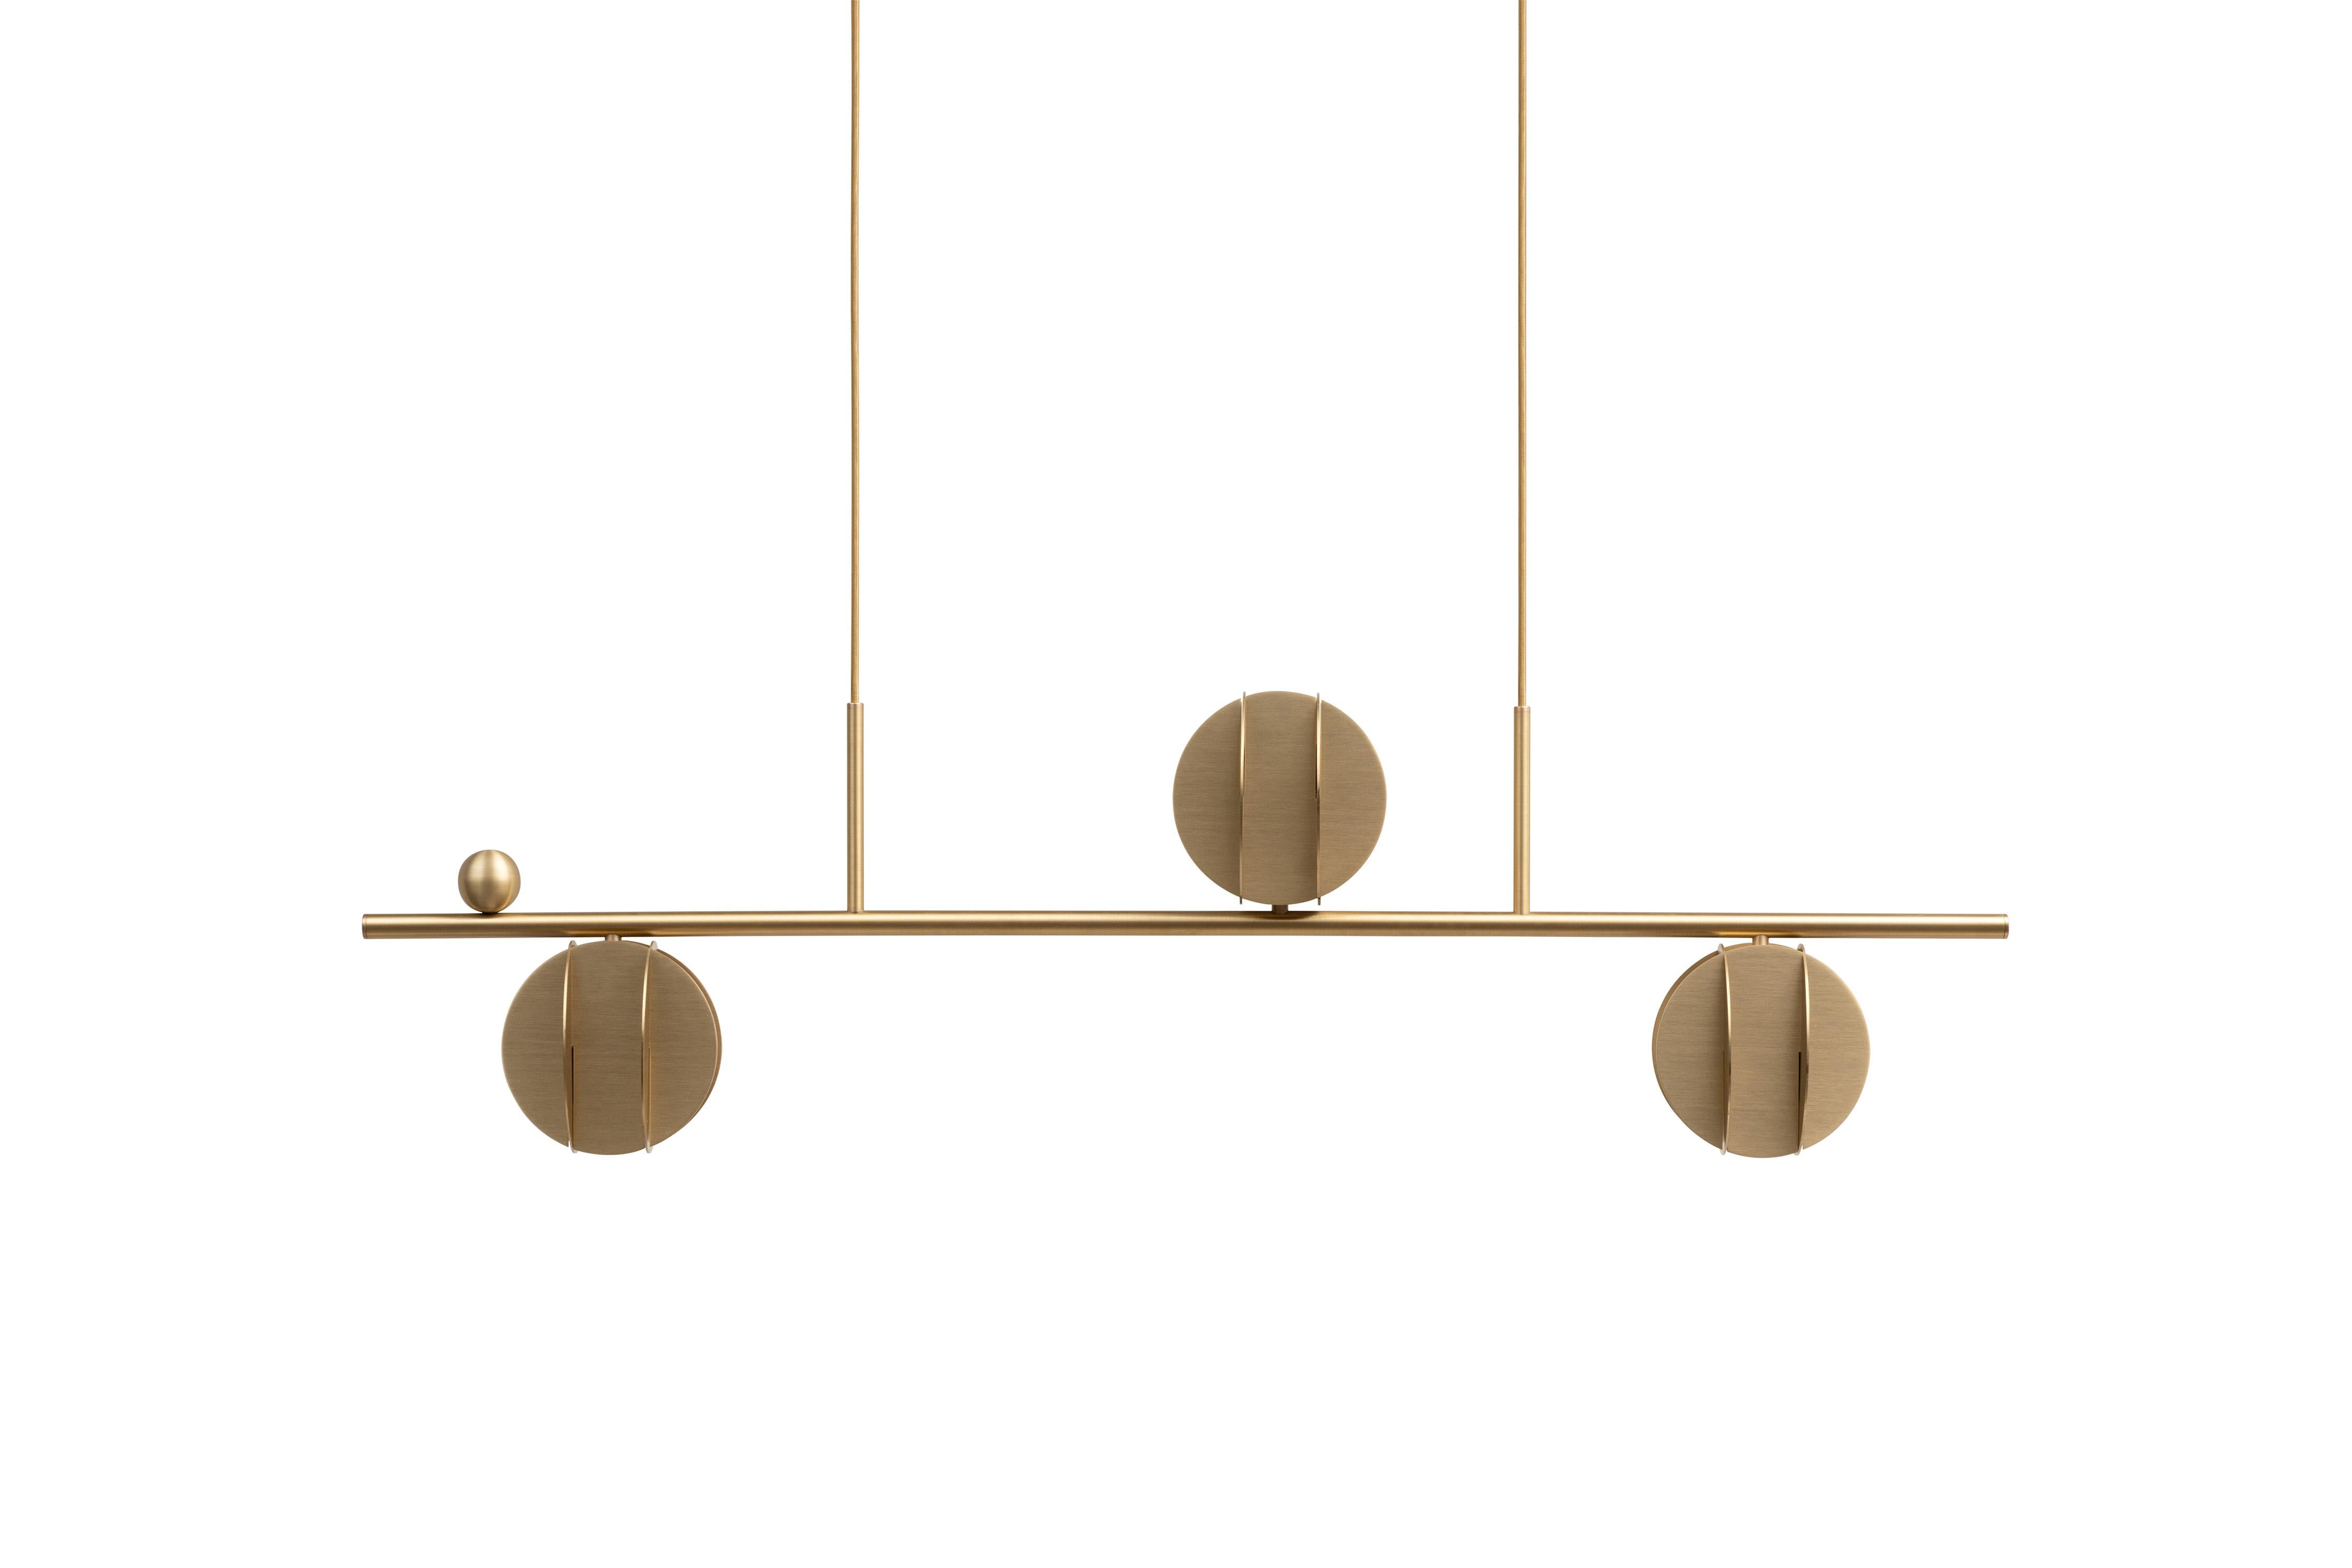 EL collection of lighting is inspired by the geometric works of the great Suprematist artists El Lissitzky and Kazimir Malevich. Suprematism is a modernist movement in the art of the early 20th century, focused on the basic geometric forms, such as